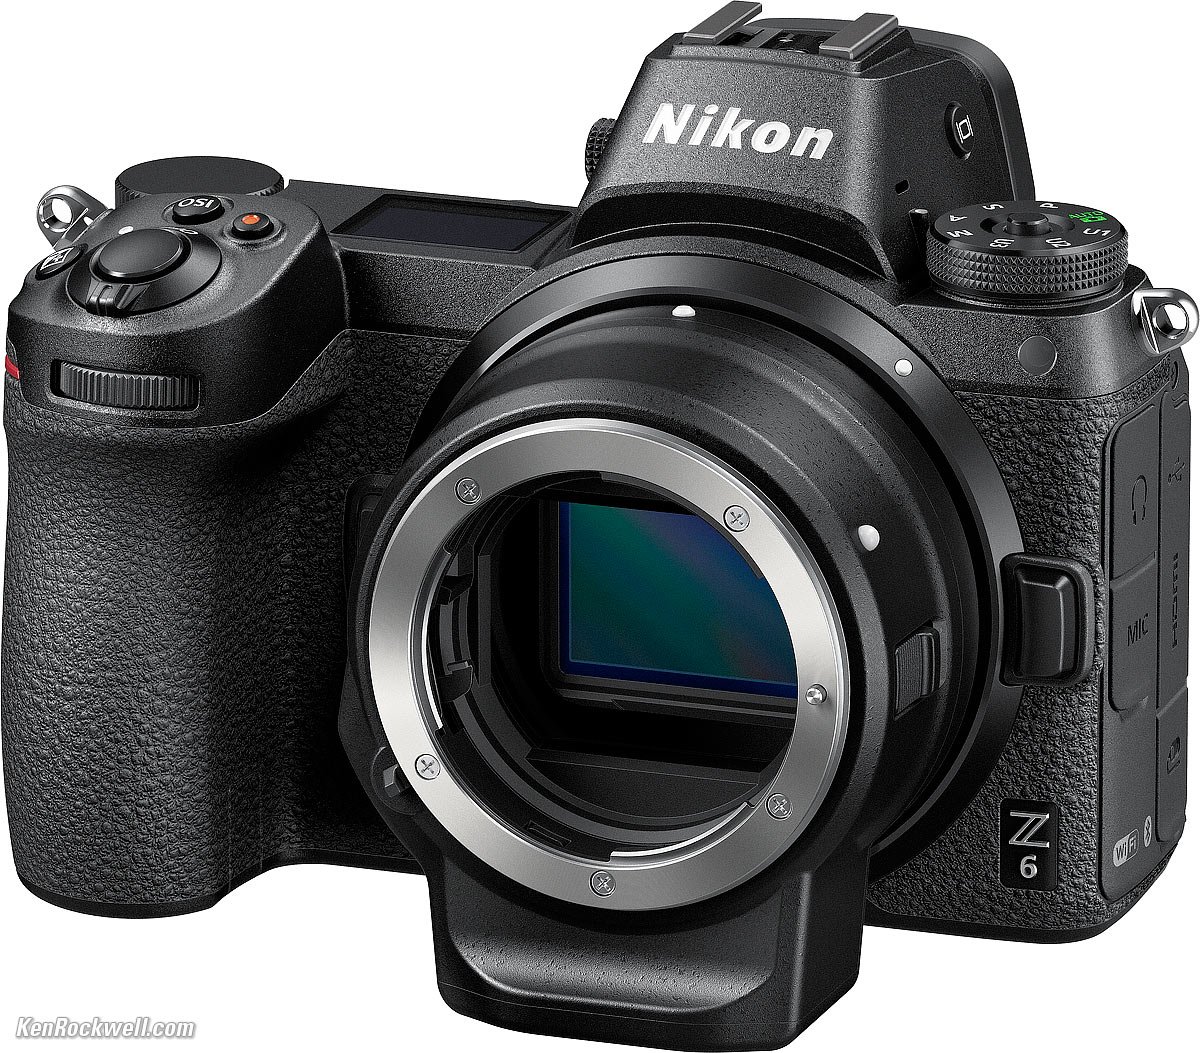 Nikon FTZ & FTZ II Lens Adapter Compatibility & Review